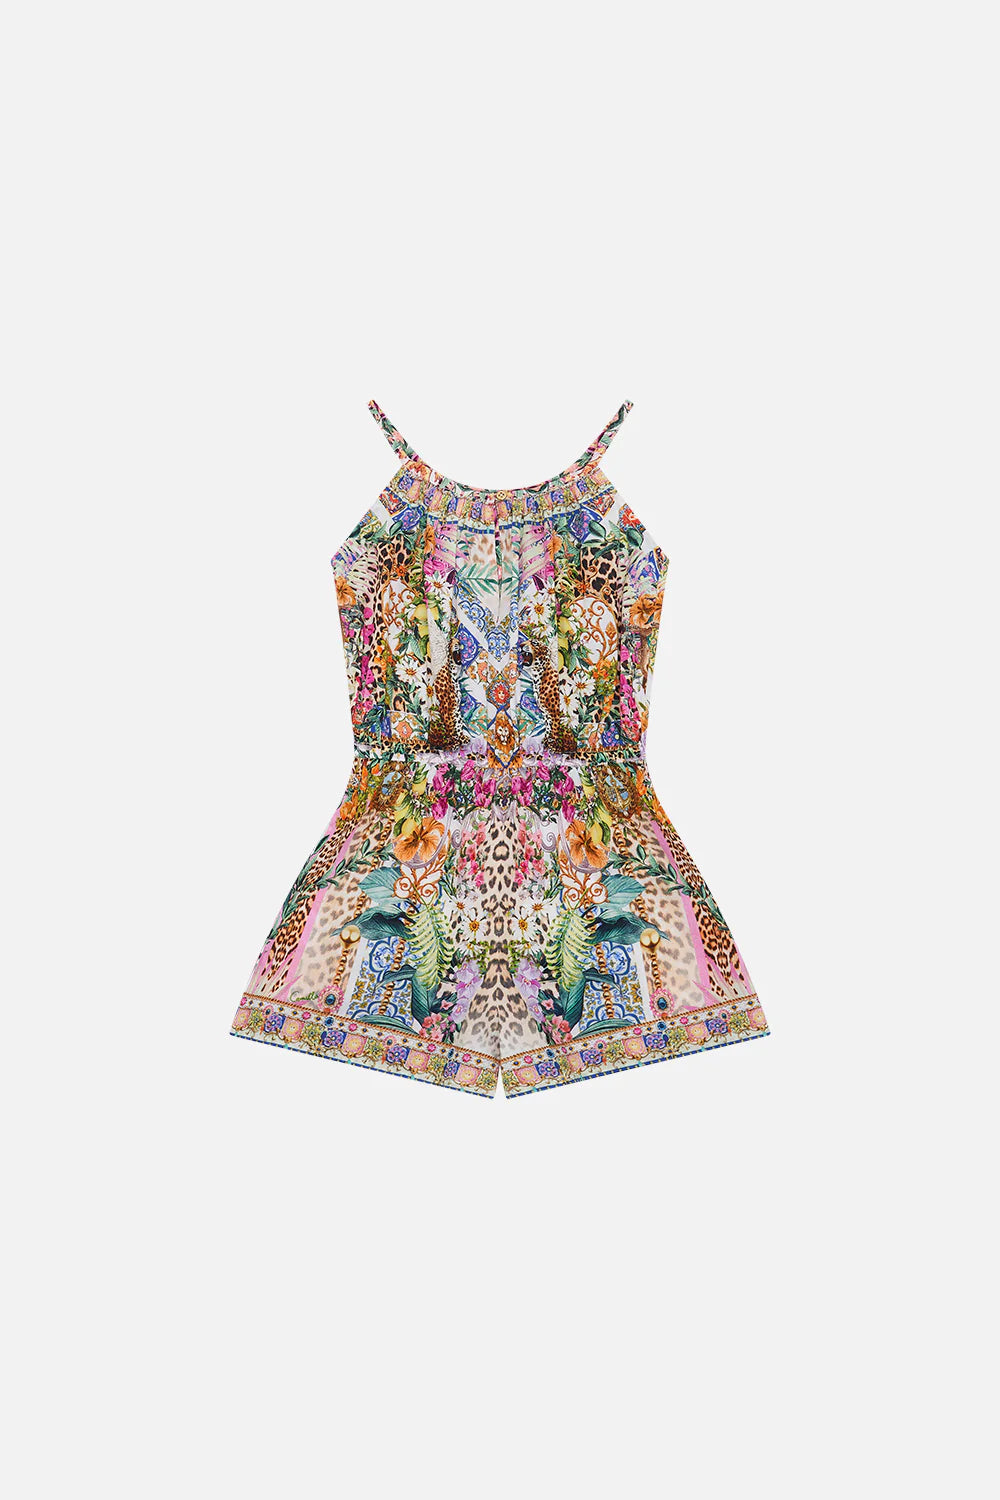 Camilla Flowers Of Neptune Kids Shoestring Strap Playsuit